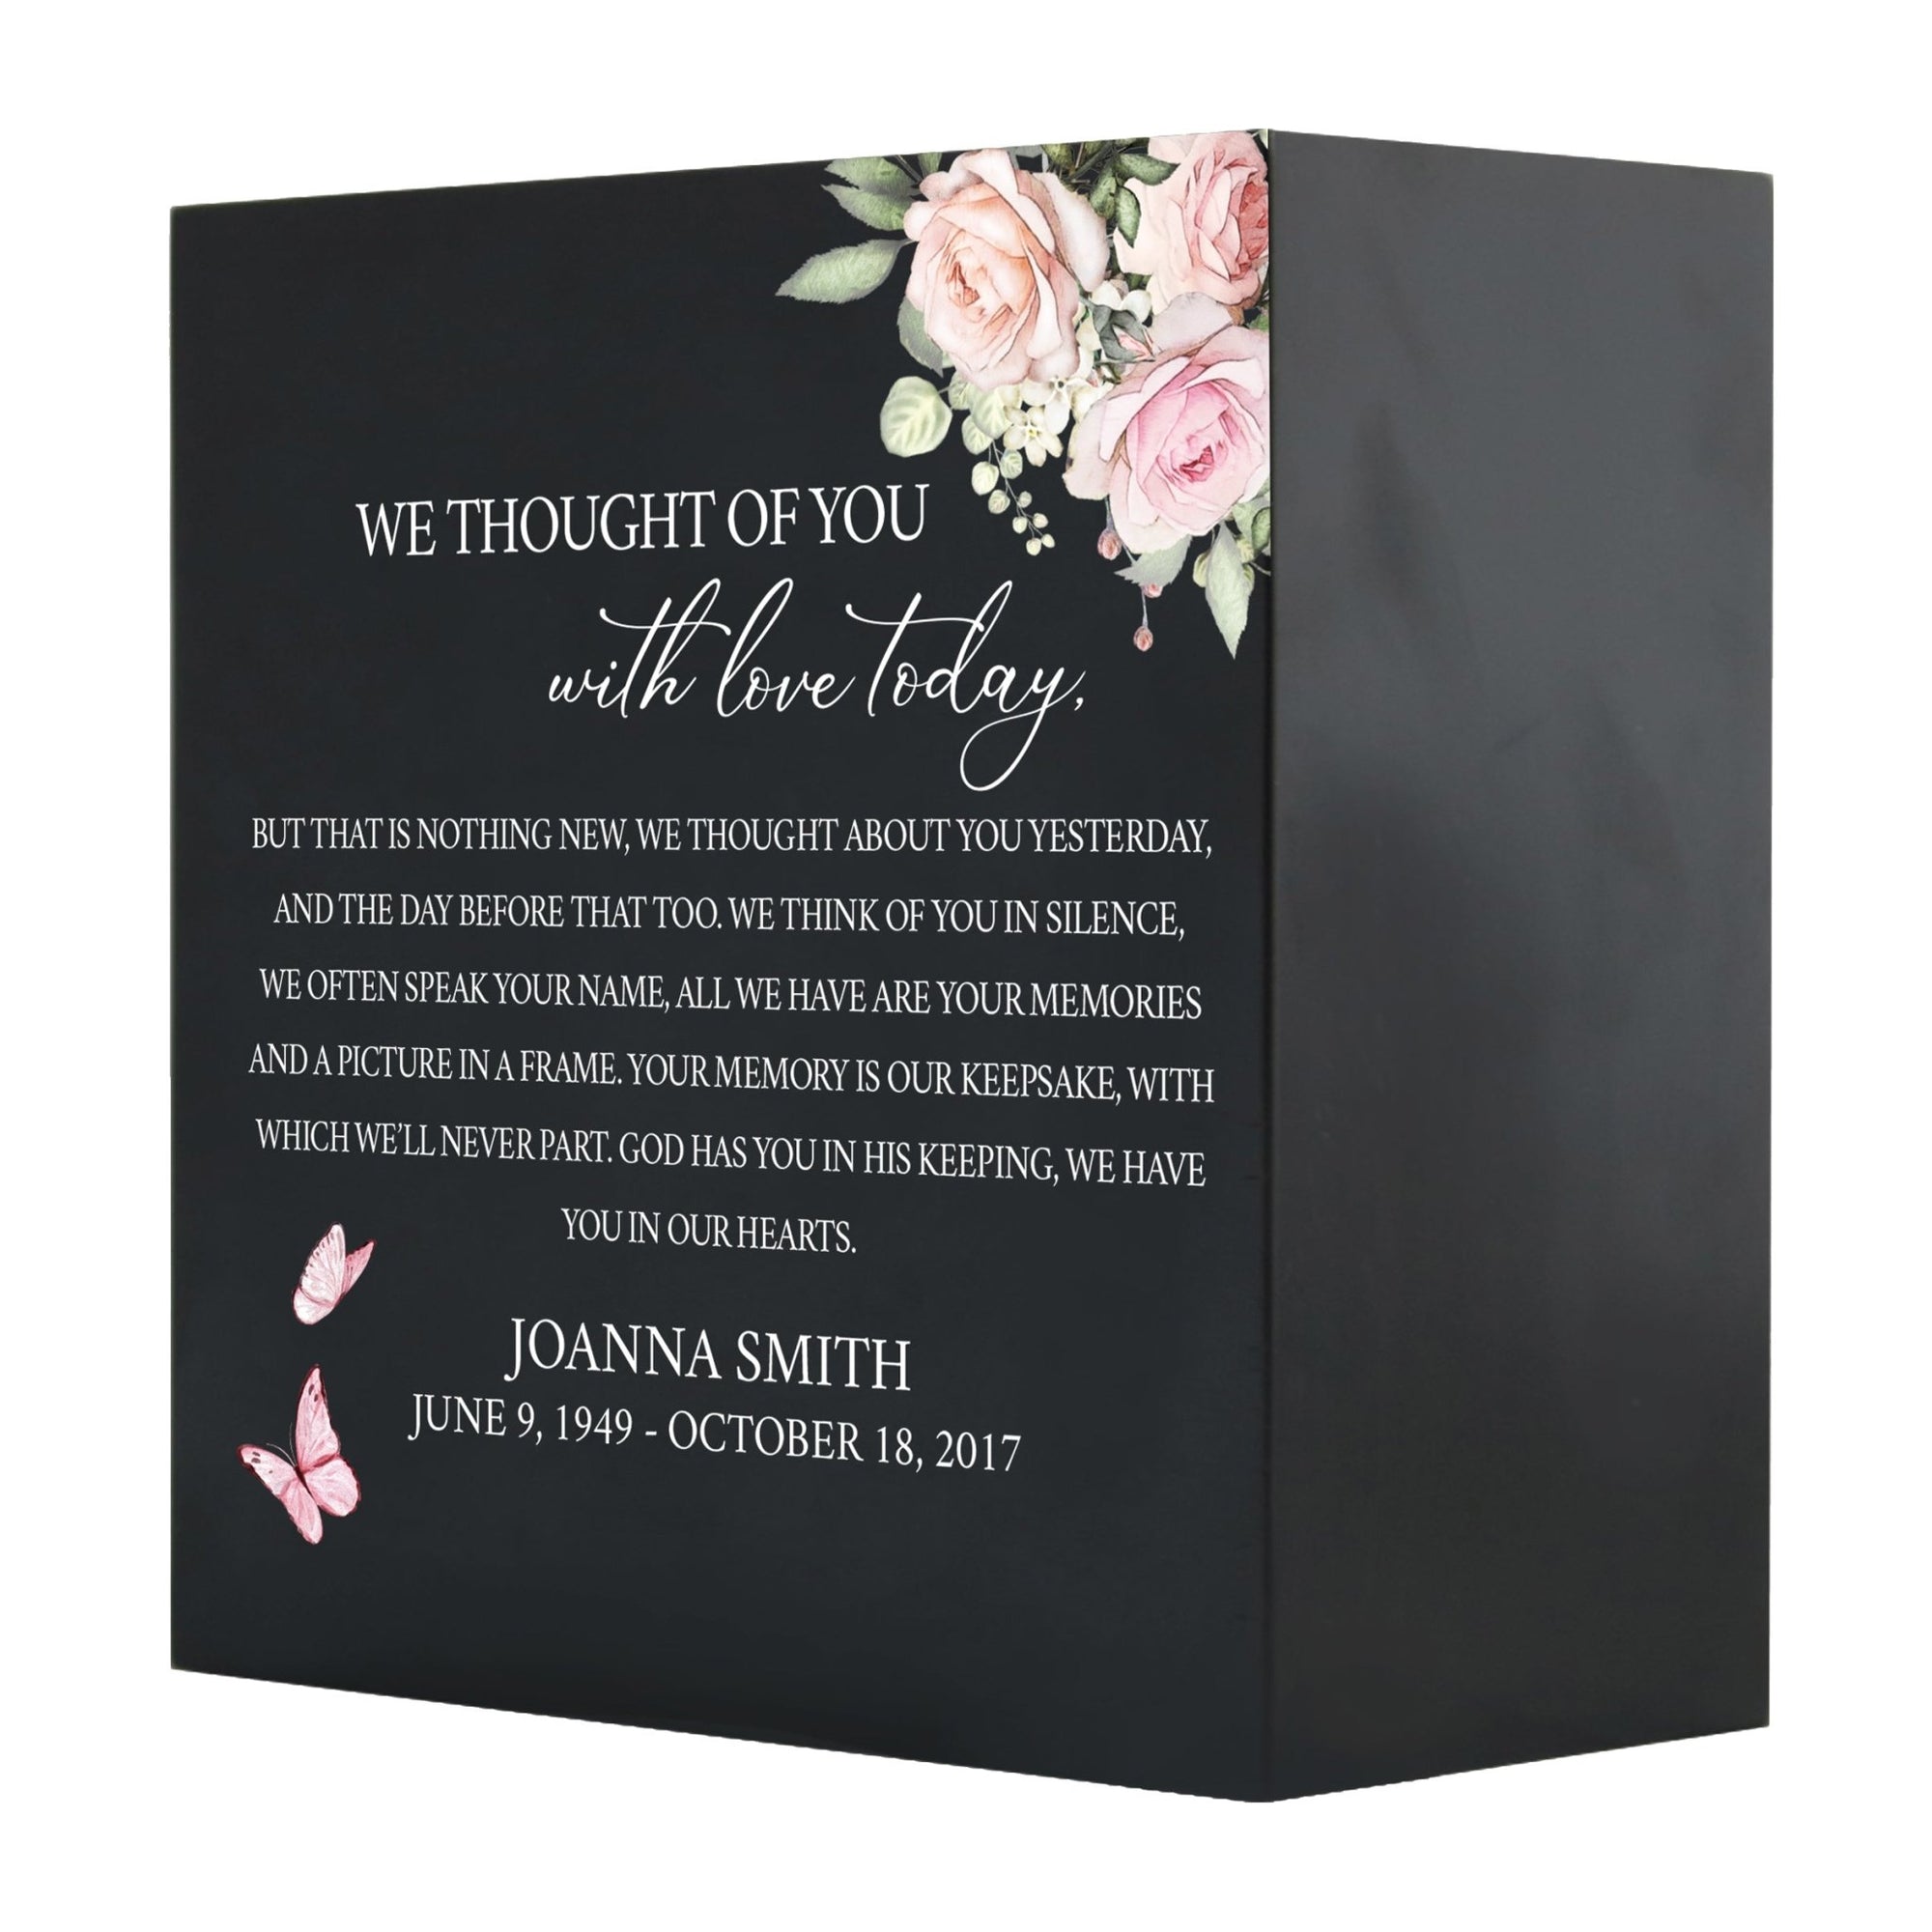 Personalized Modern Inspirational Memorial Wooden Shadow Box and Urn 6x6 holds 53 cu in of Human Ashes - We Thought Of You (Black) - LifeSong Milestones